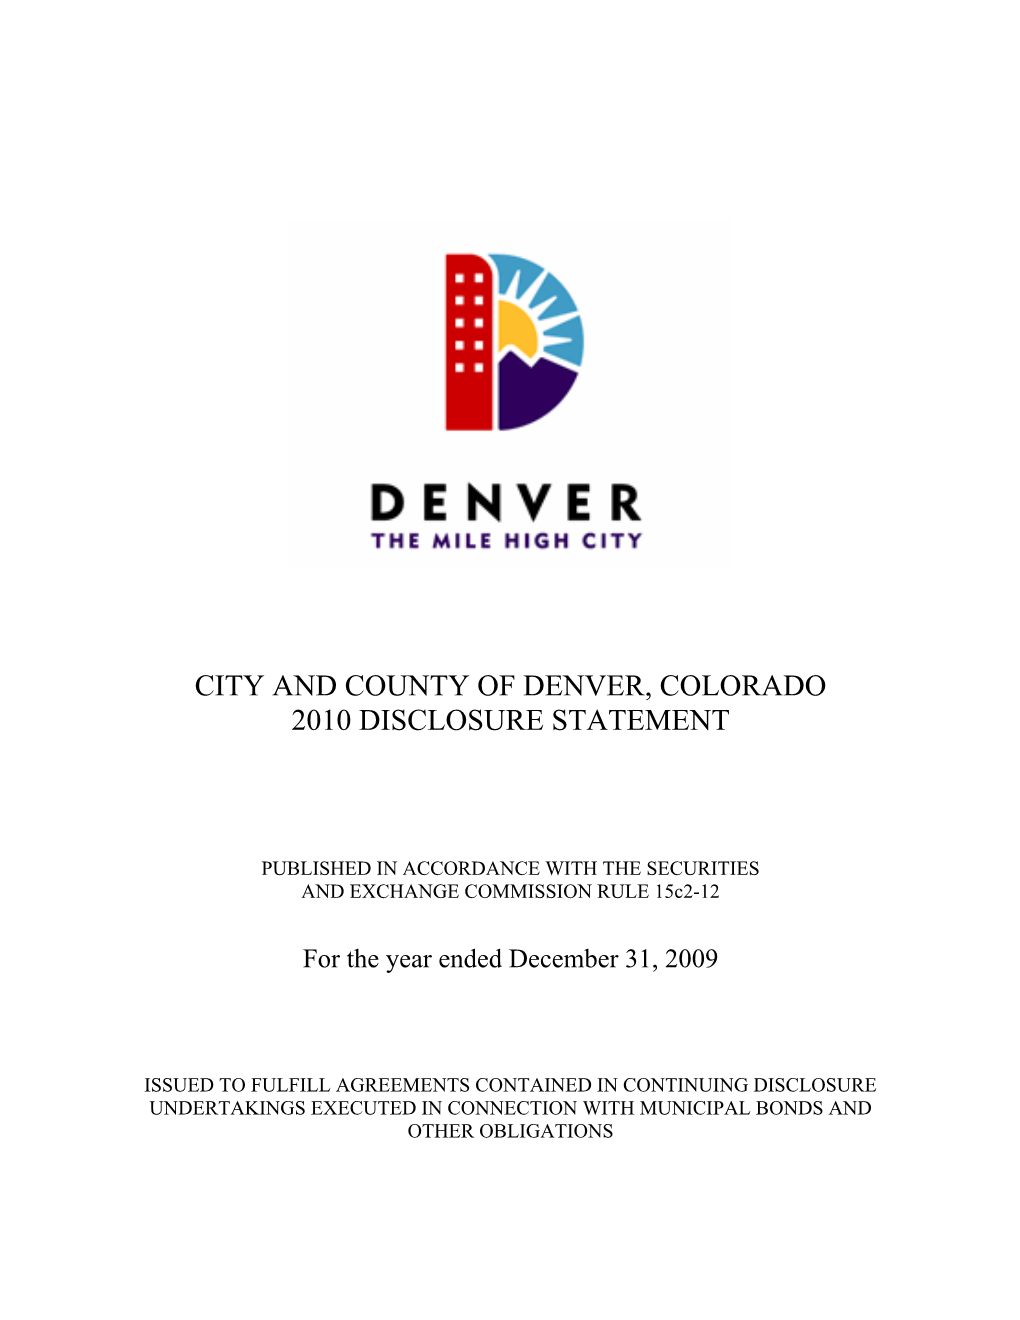 City and County of Denver, Colorado 2010 Disclosure Statement